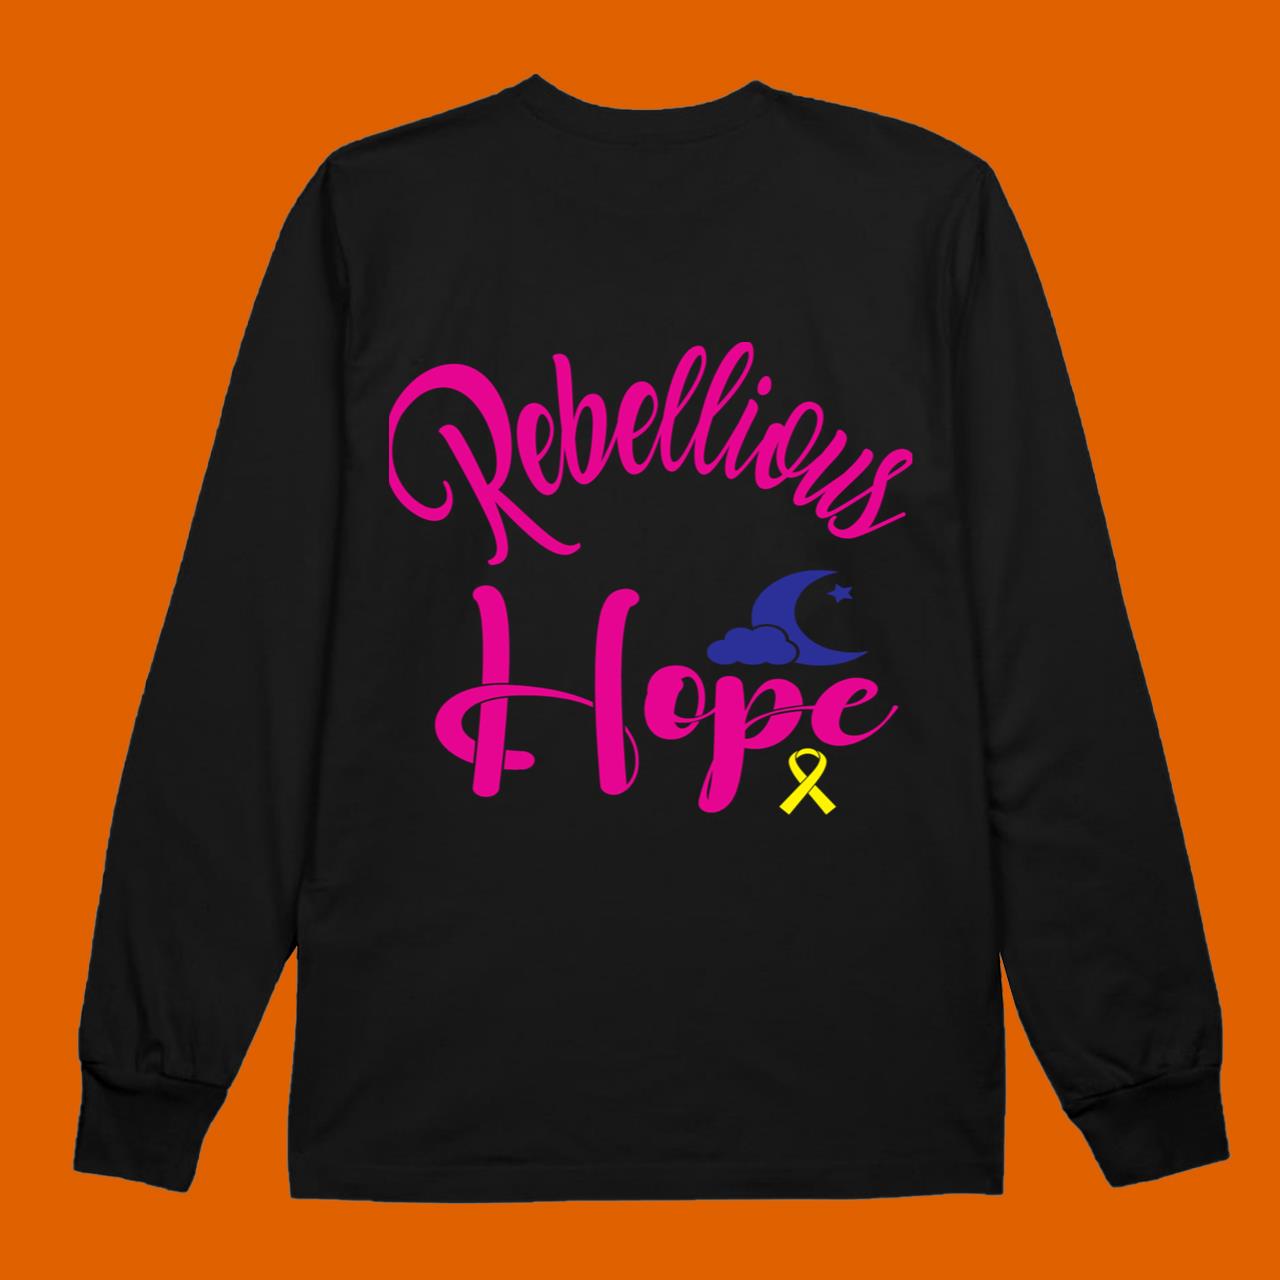 Rebellious Hope - Bowel Babe Relaxed Fit T-Shirt